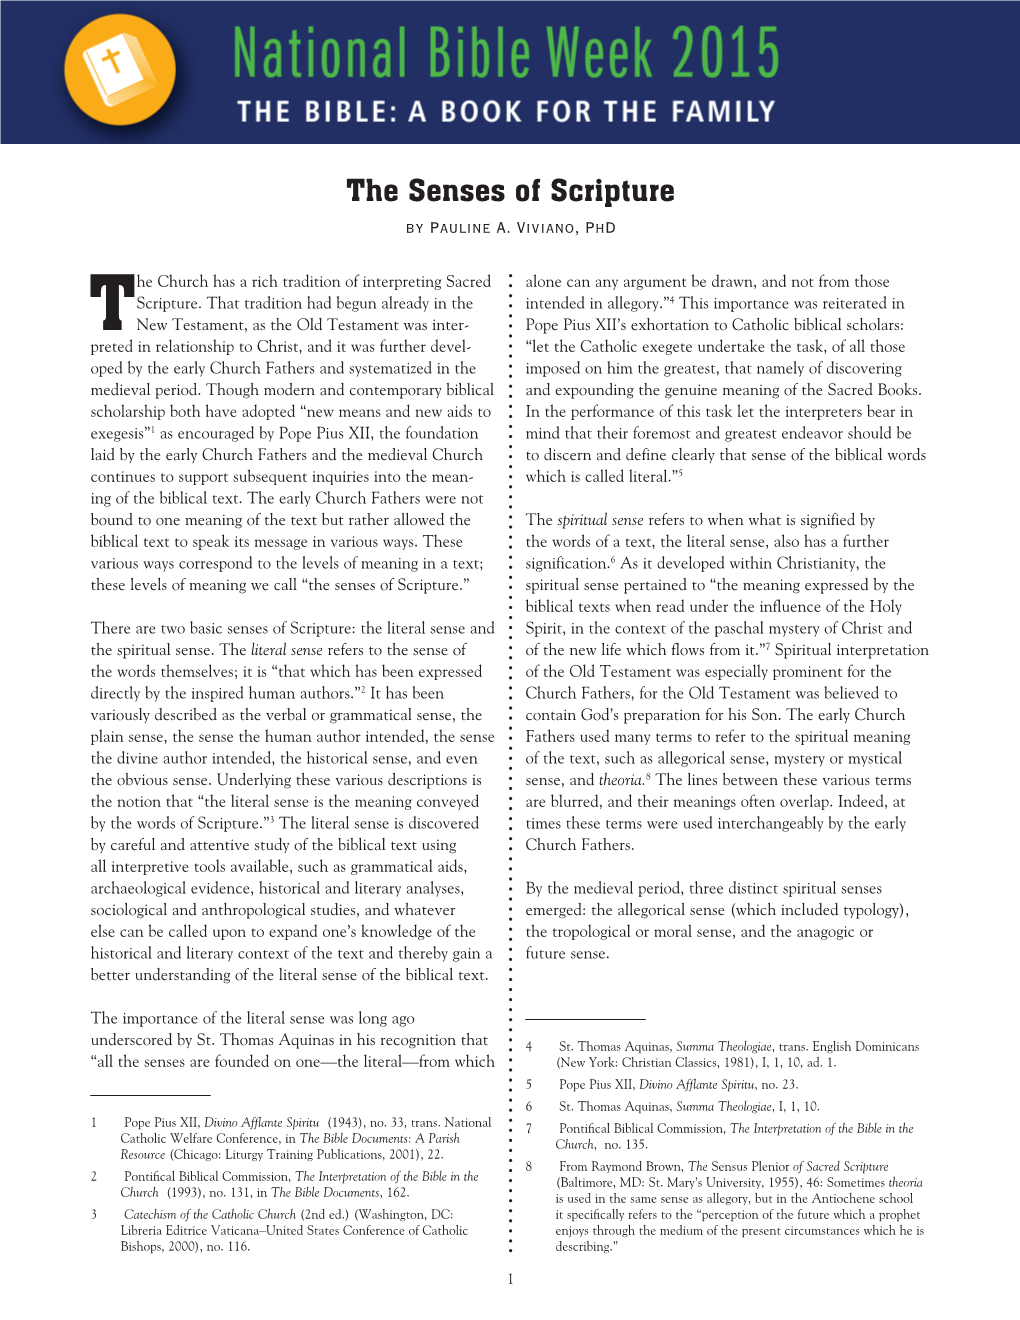 The Senses of Scripture by Pauline A